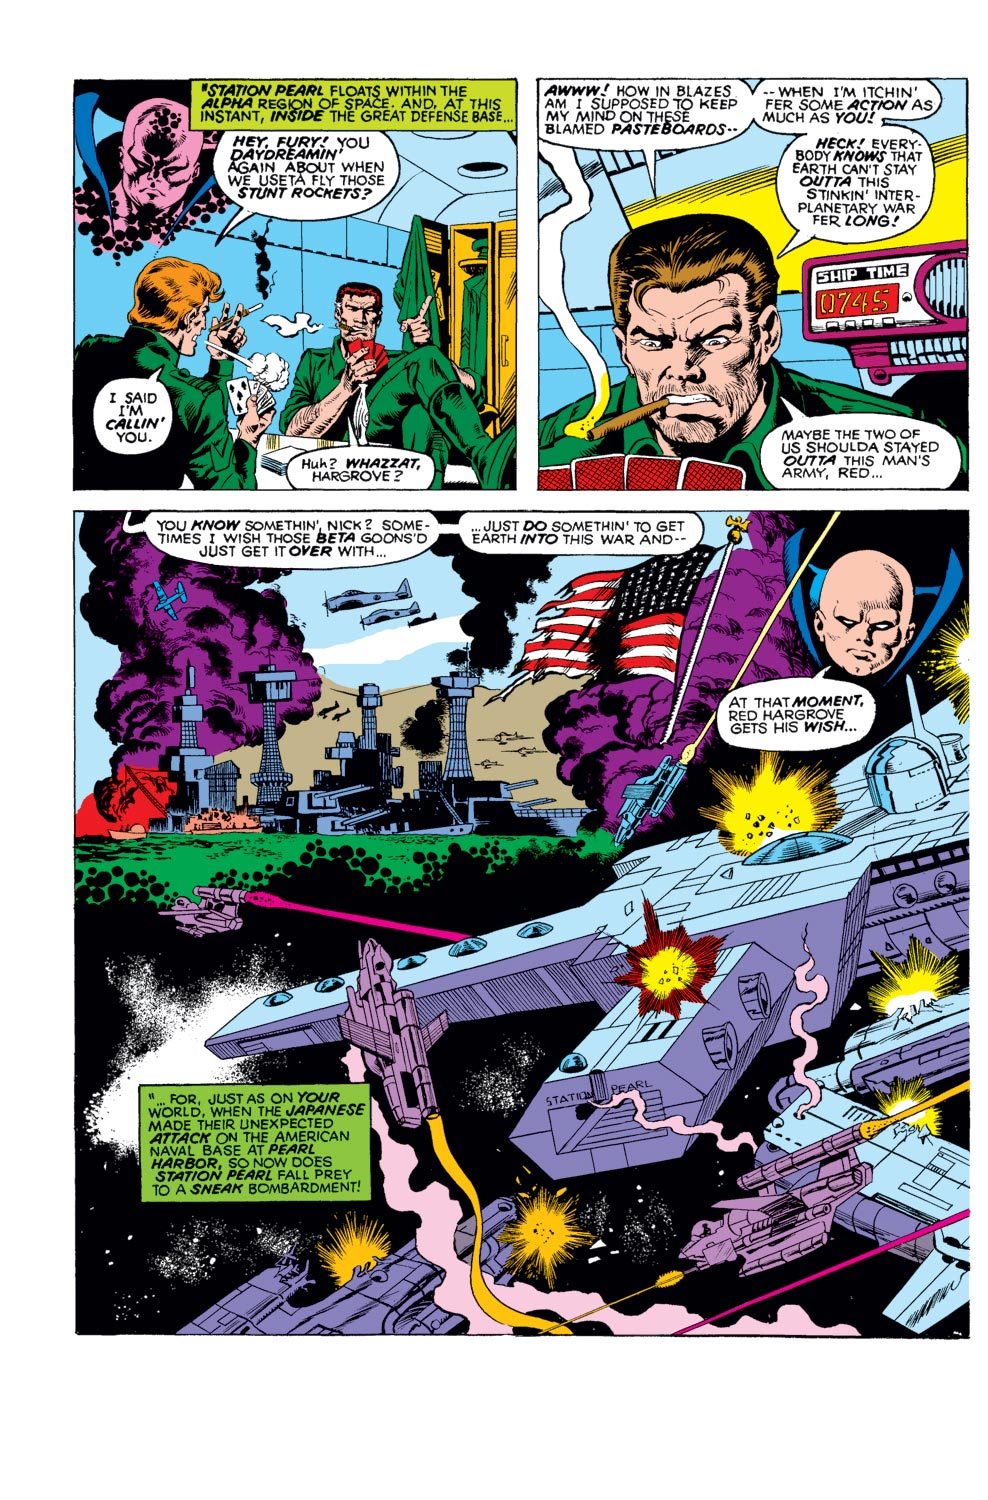 What If? (1977) issue 14 - Sgt. Fury had Fought WWII in Outer Space - Page 3